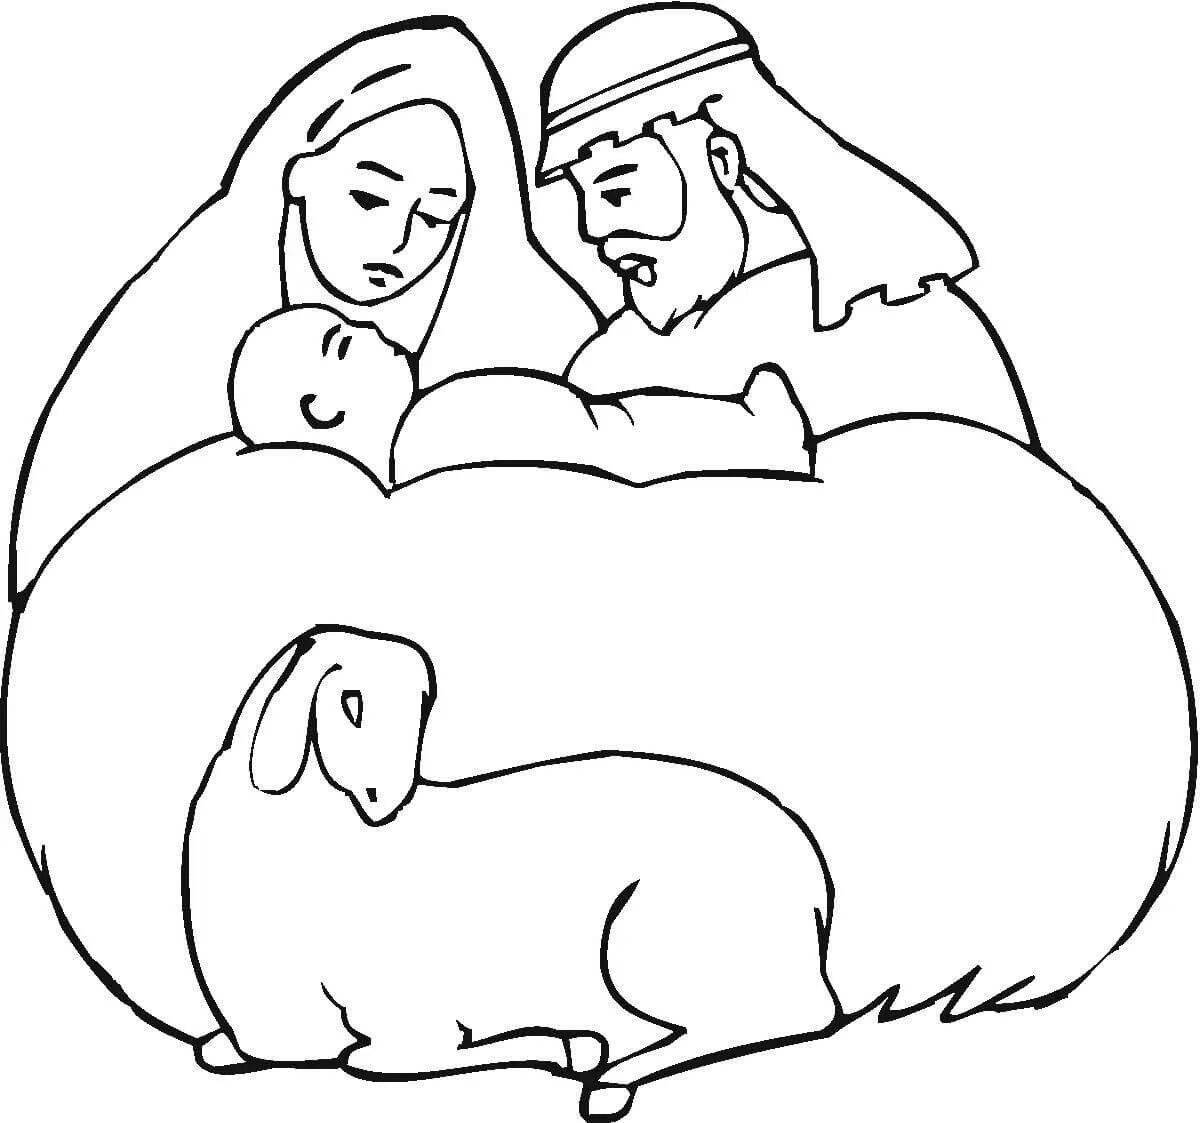 Coloring page luxurious jesus in the manger